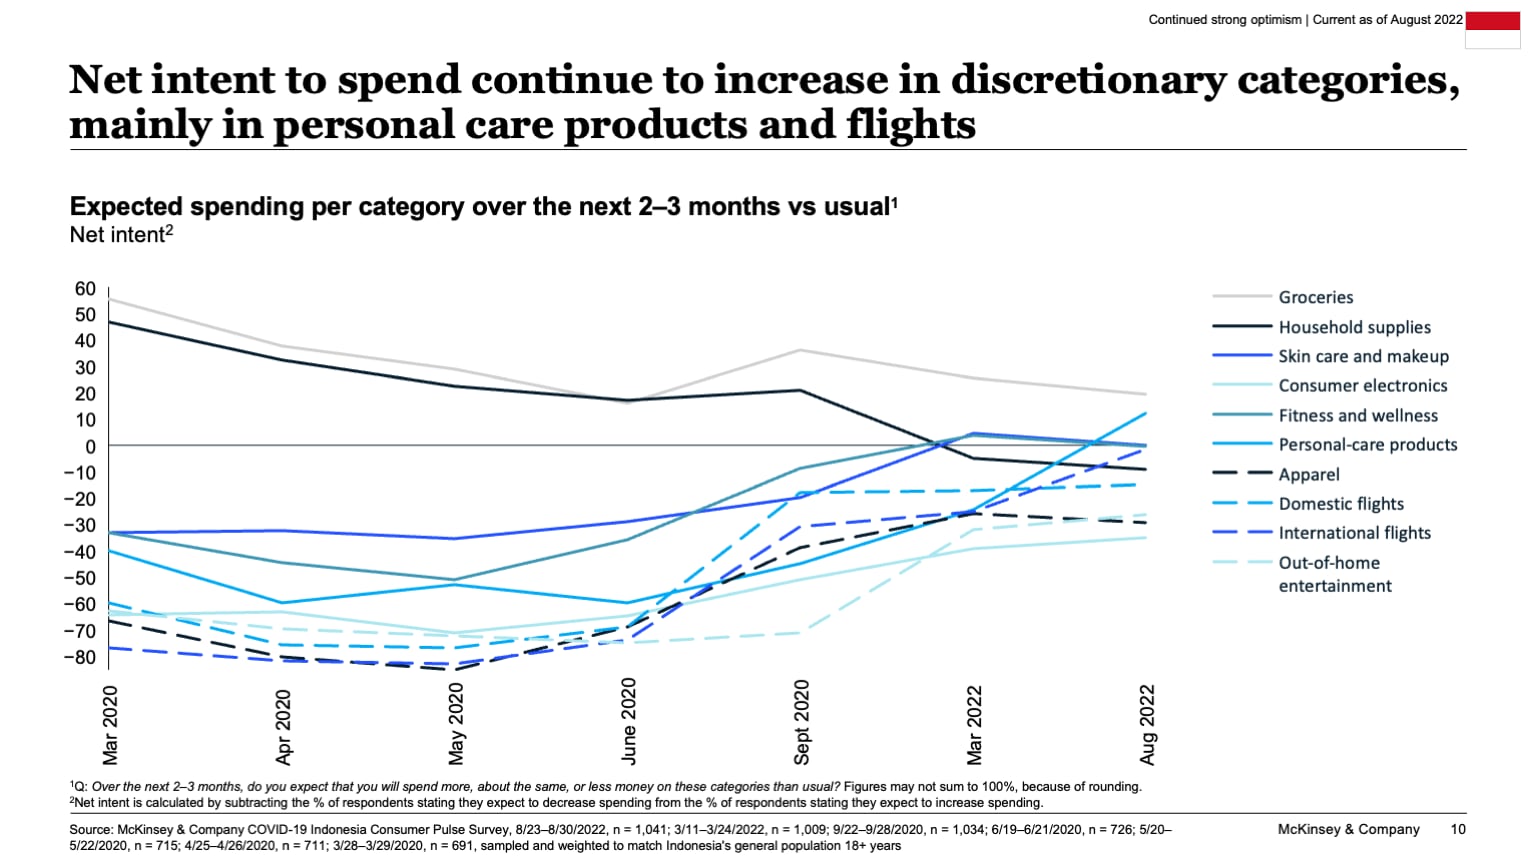 Net intent to spend continue to increase in discretionary categories, mainly in personal care products and flights